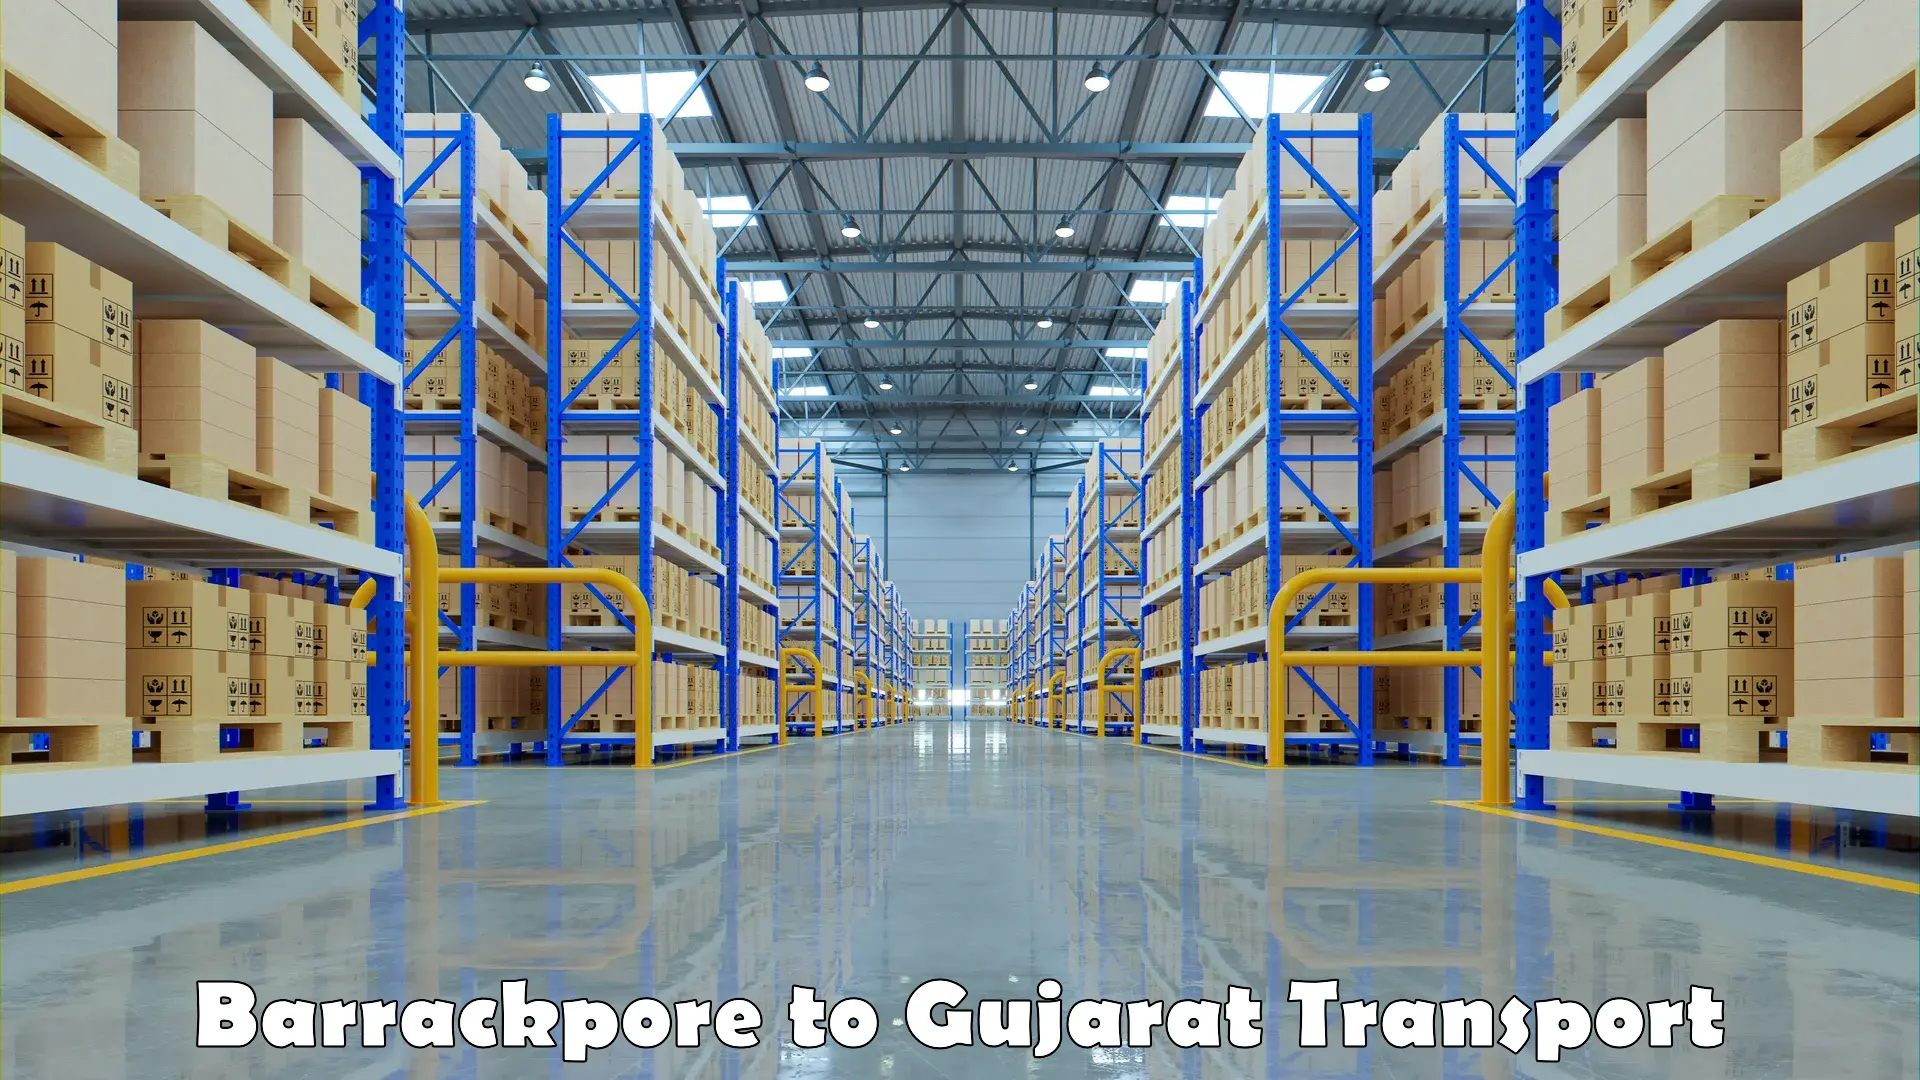 Lorry transport service Barrackpore to Gujarat